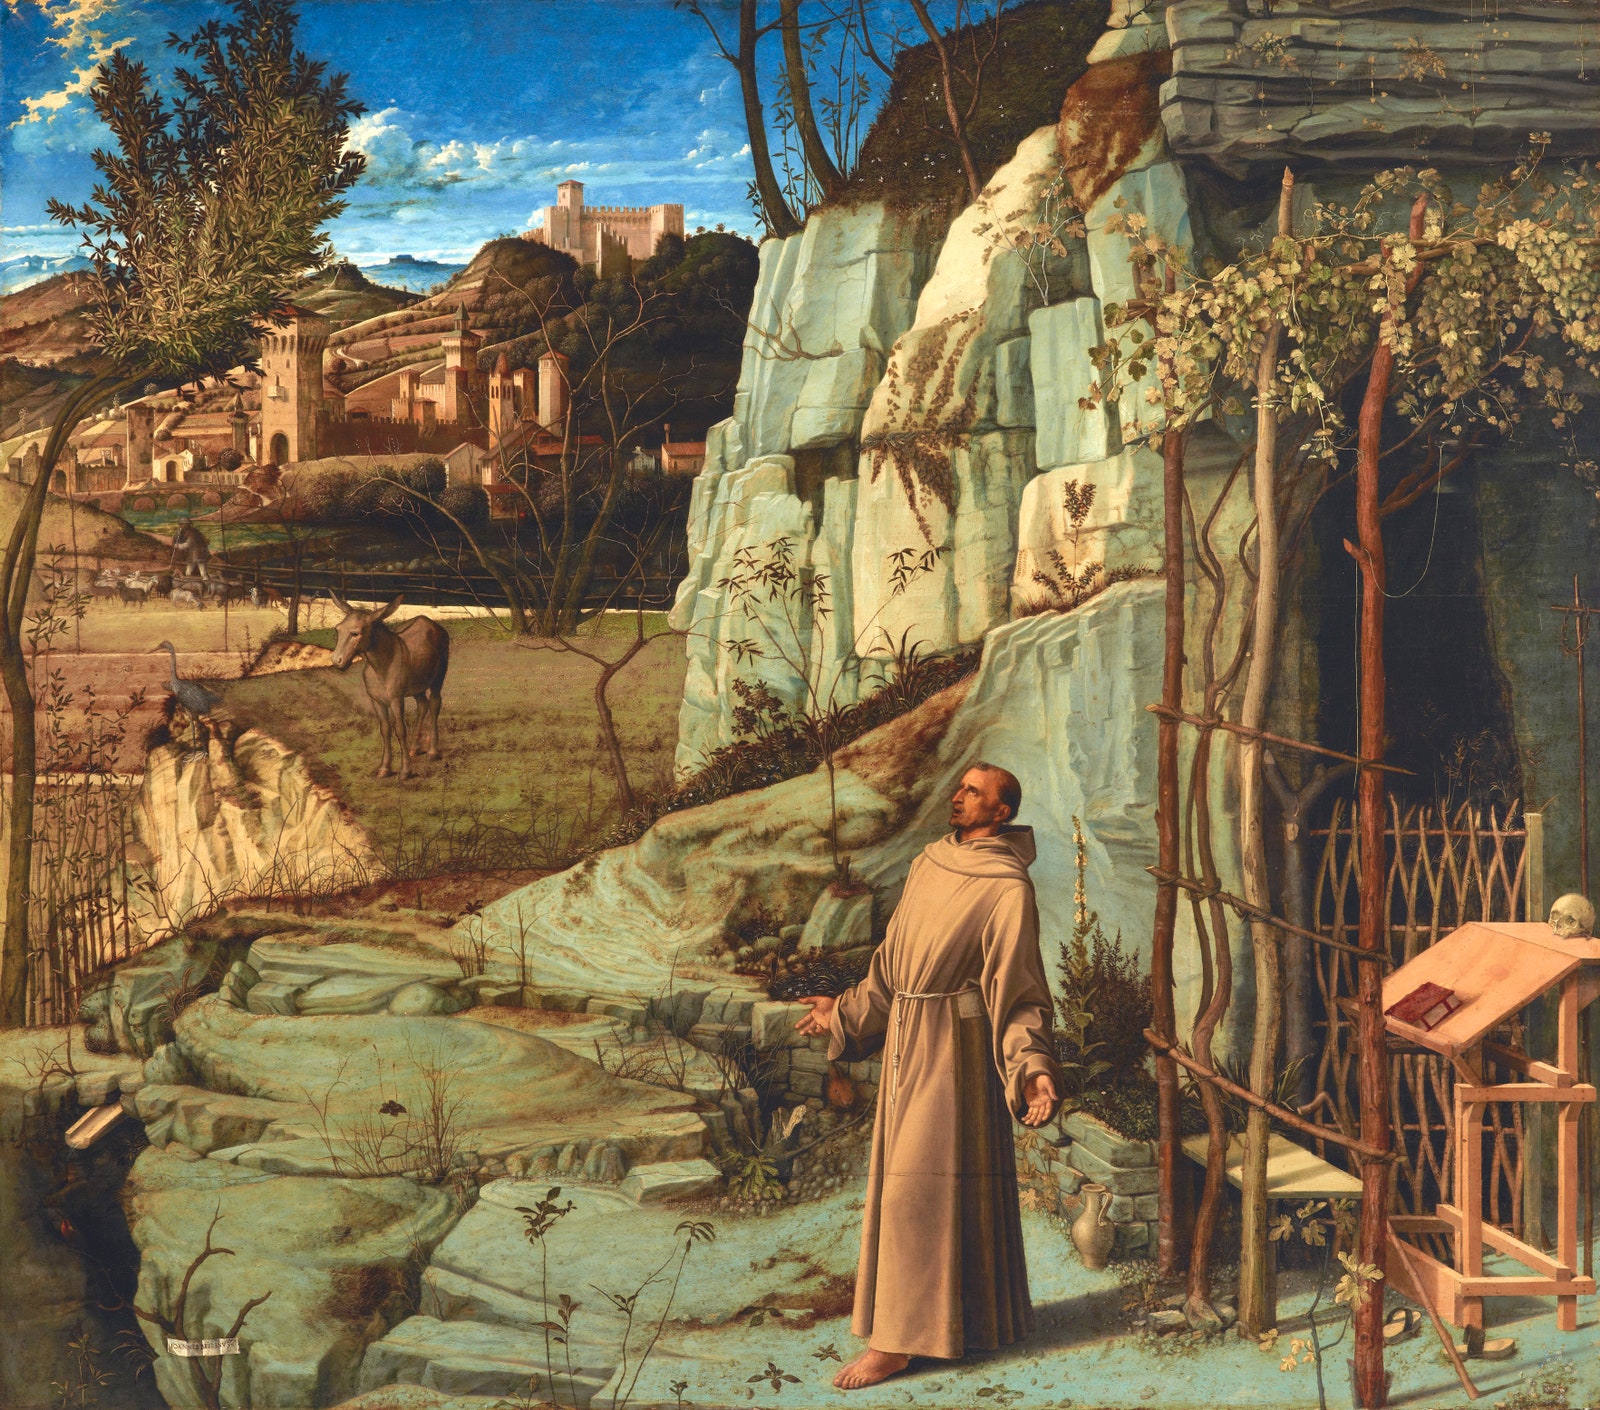 St. Francis in the Desert by Giovanni Bellini 1480. Oil and tempera on poplar panel